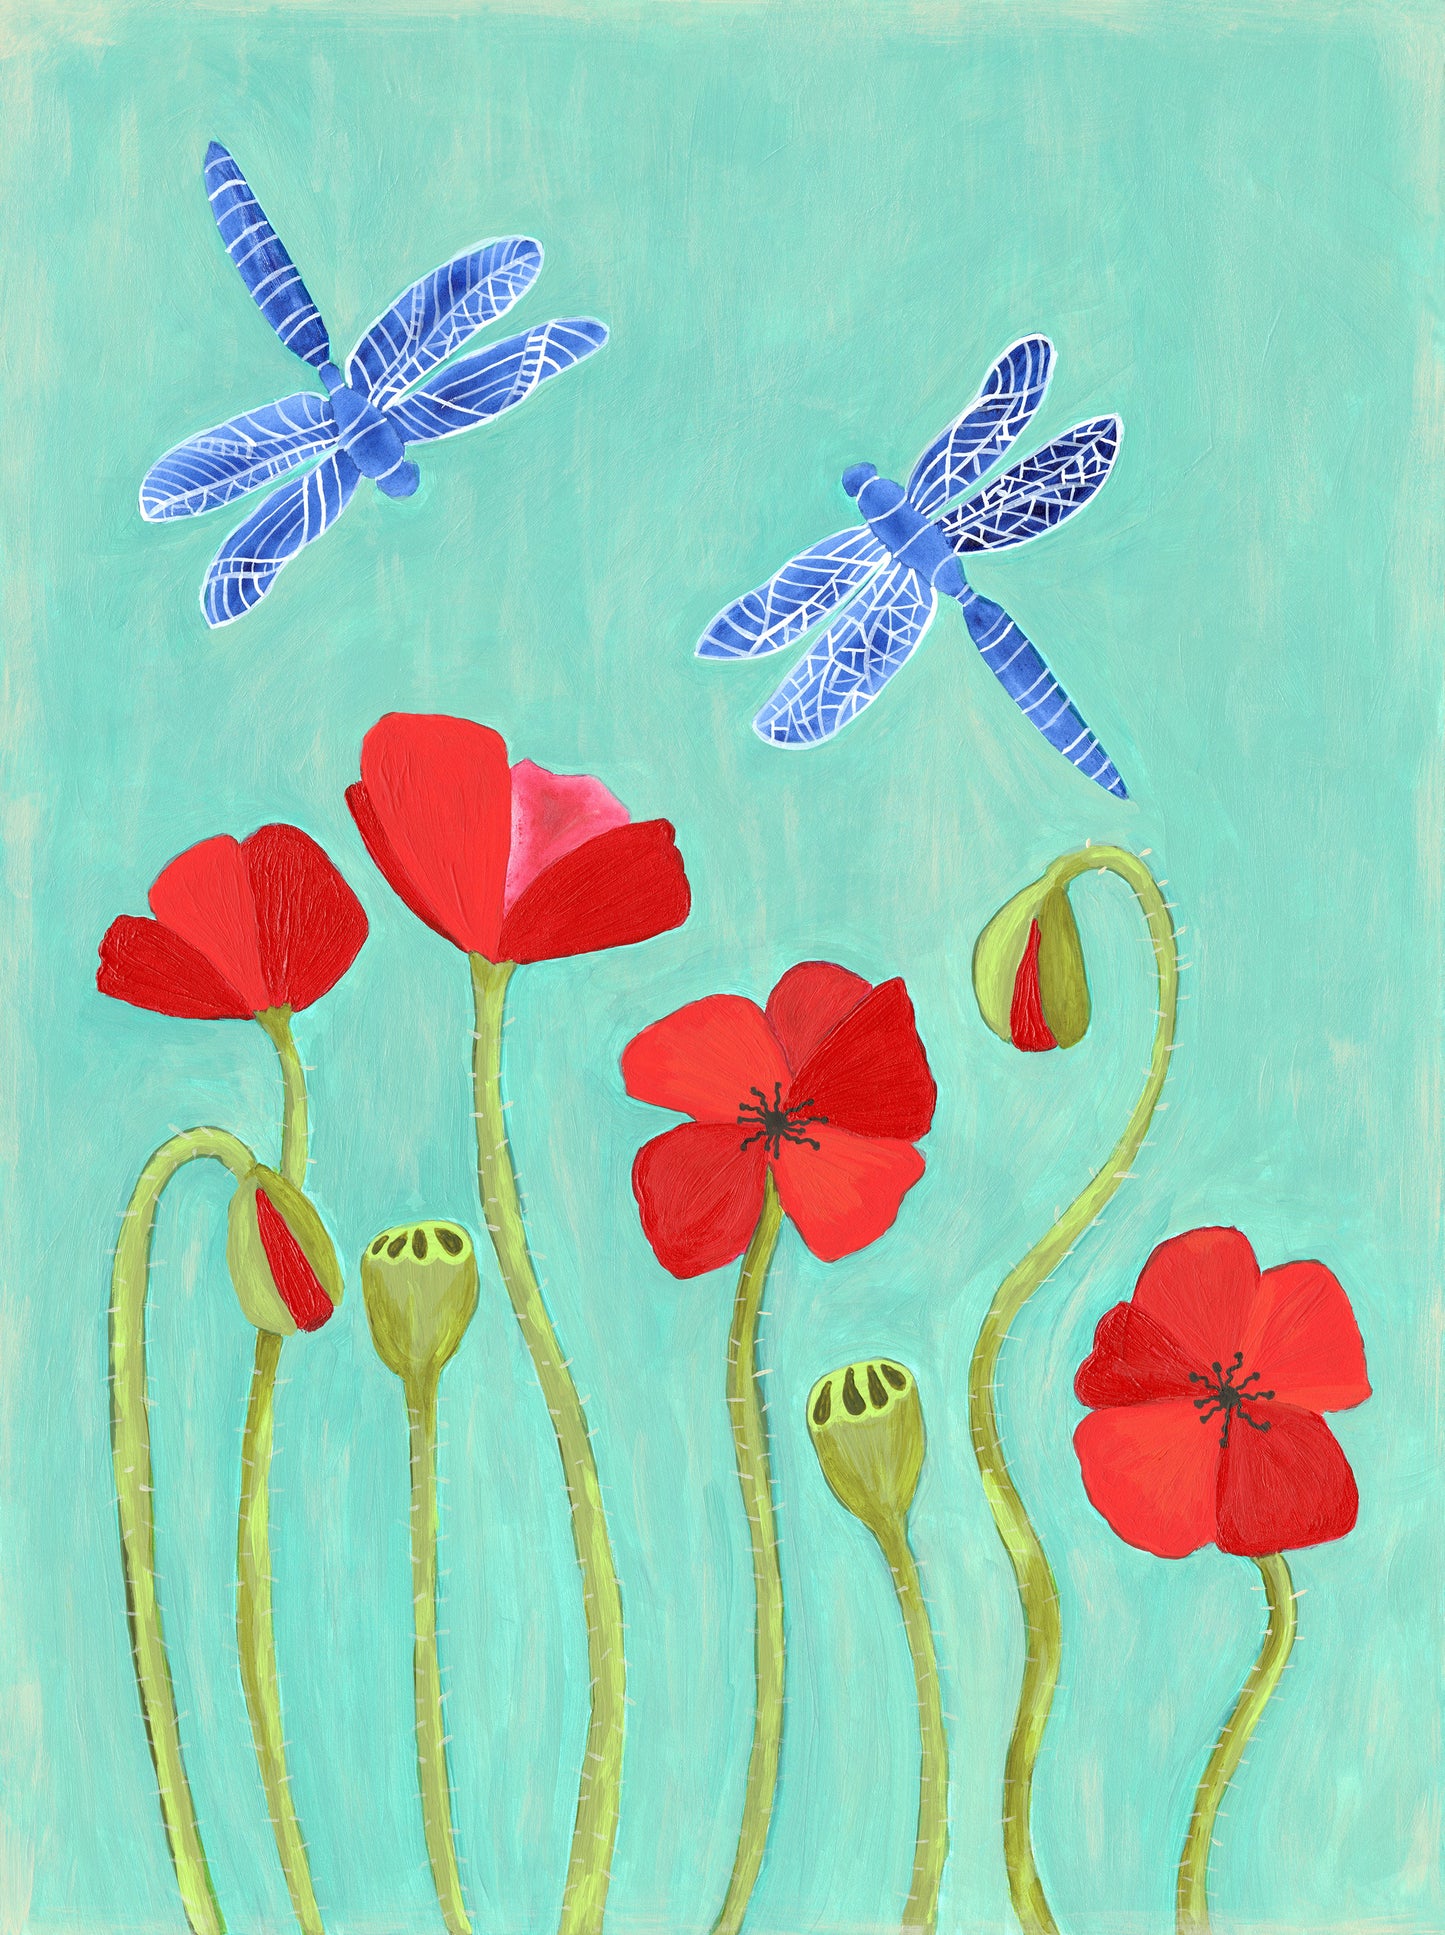 Red Poppies and Dragonflies greeting card